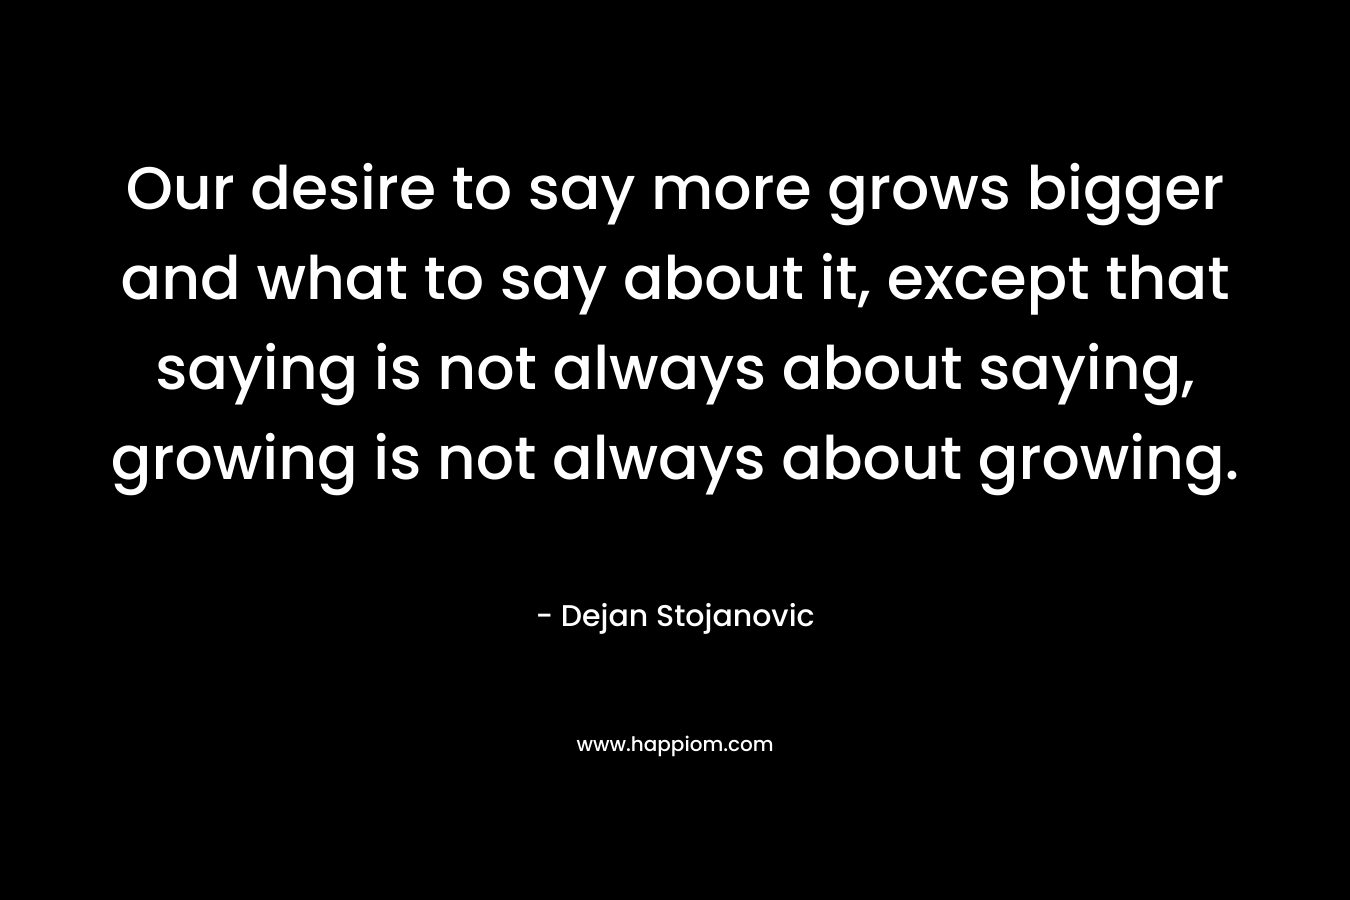 Our desire to say more grows bigger and what to say about it, except that saying is not always about saying, growing is not always about growing.